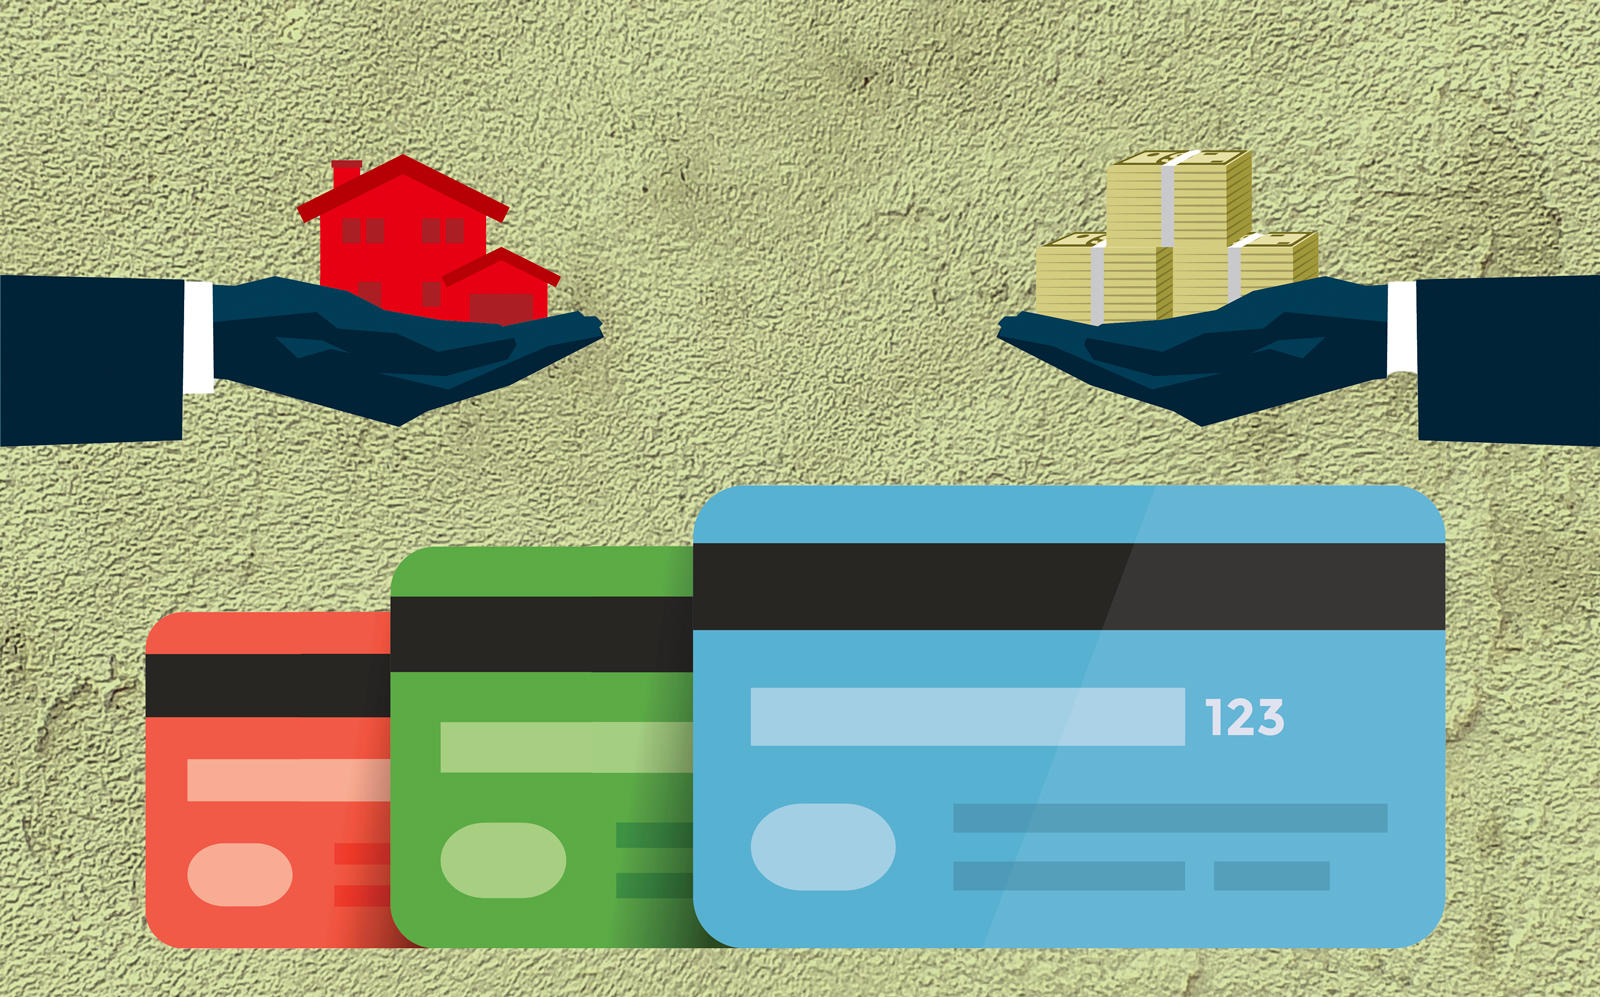 Cash-strapped mortgage borrowers are paying off credit cards and other consumer debt instead because those bills are lower (iStock)